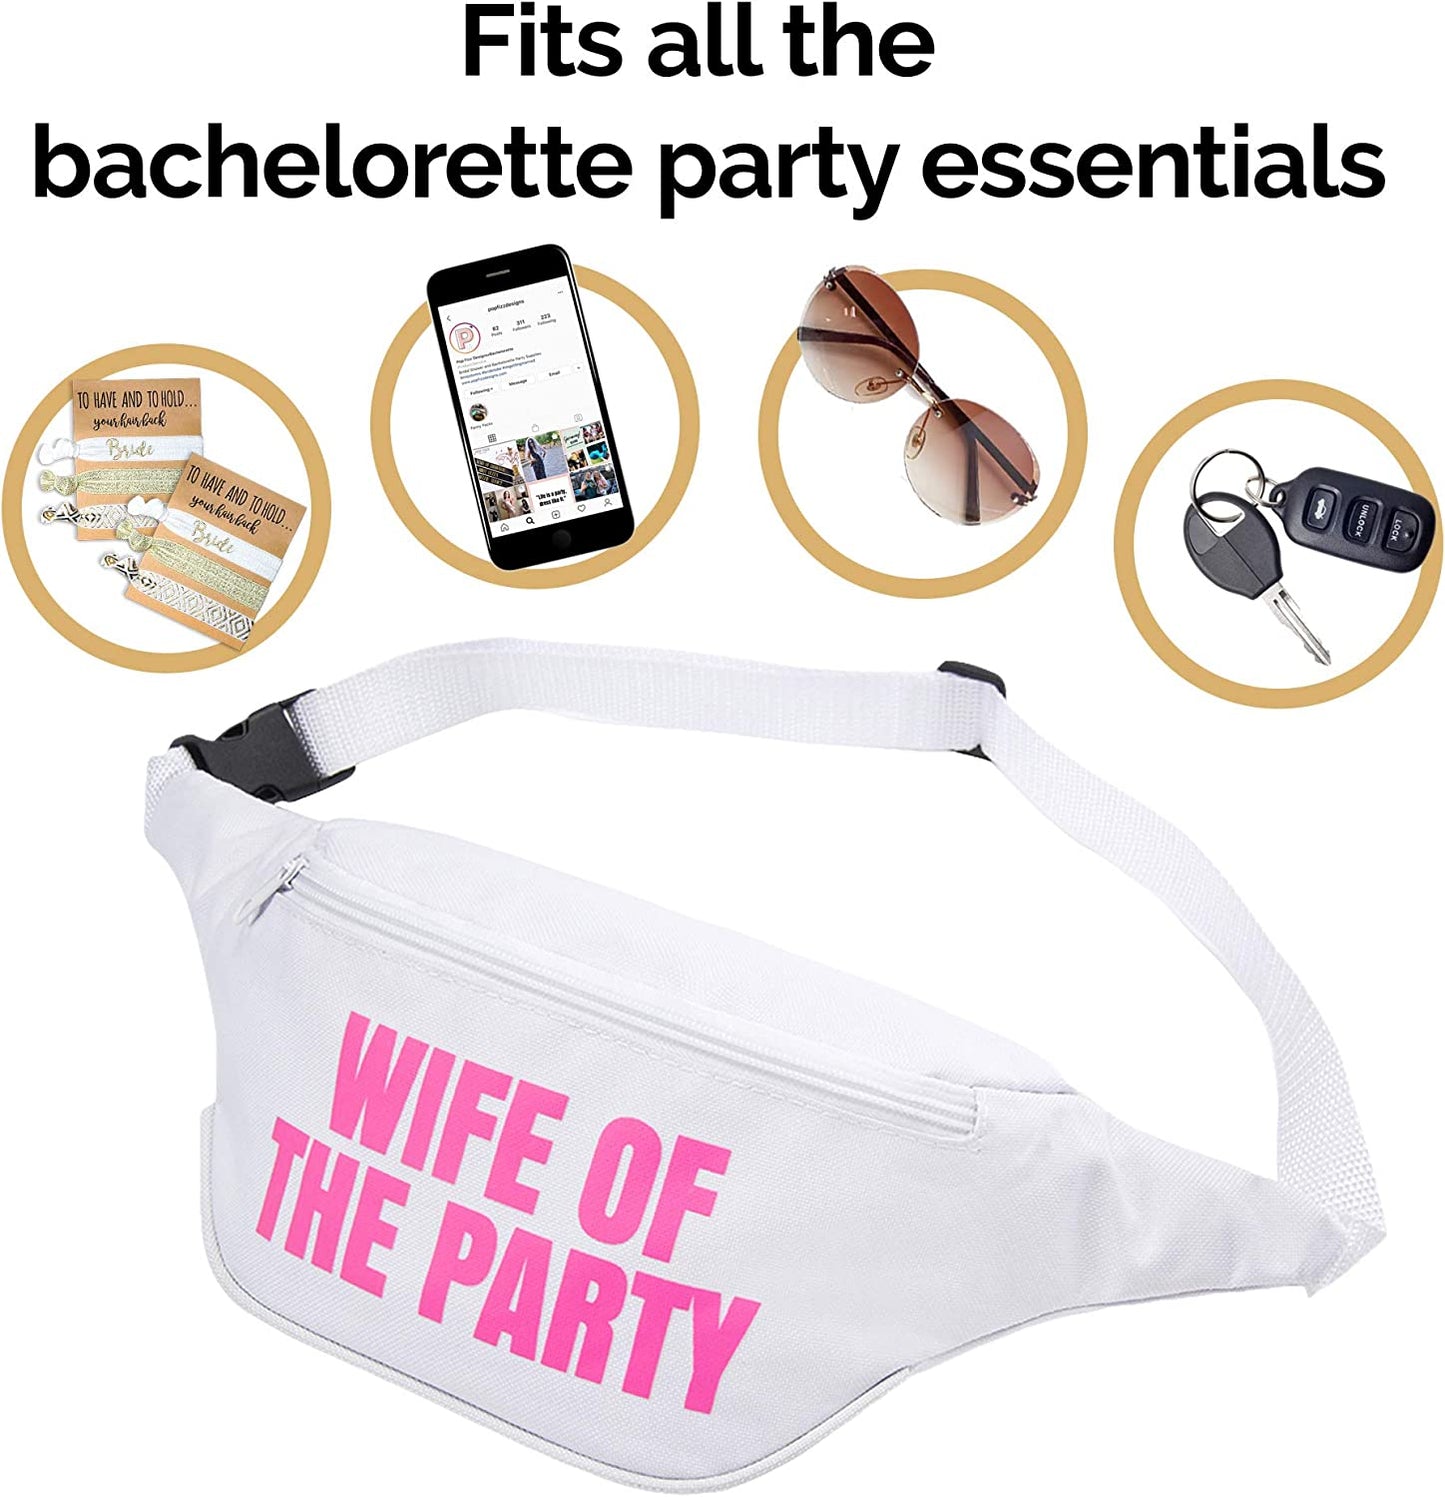 Bachelorette 80S Fanny Pack Set | 1 “Wife of the Party” Fanny Pack and Party Fanny Packs | Bachelorette Party Favors (12 Pack)